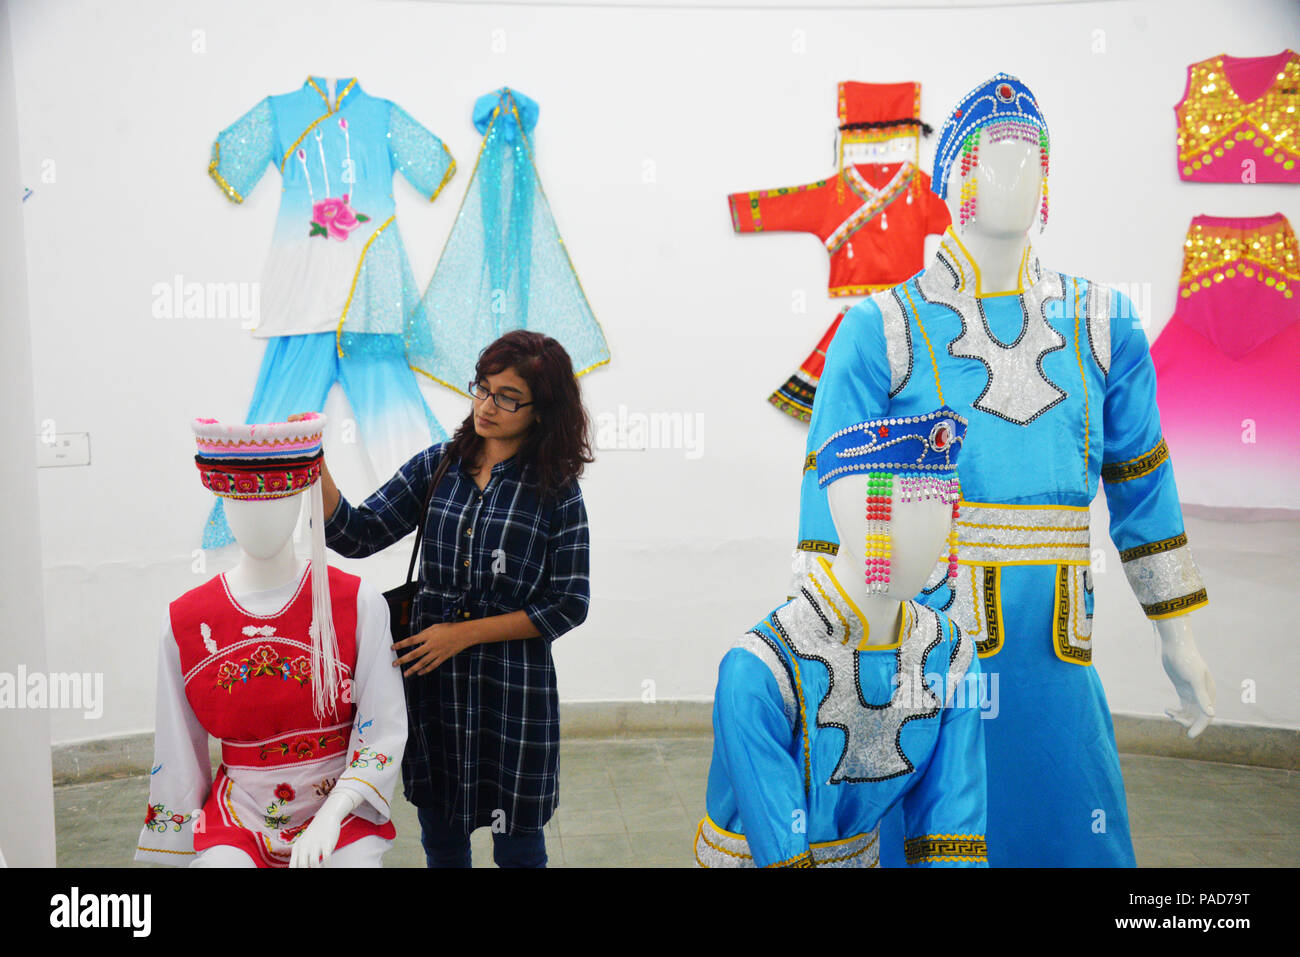 Dhaka. 22nd July, 2018. A visitor touches the costume at the exhibition portraying the history and culture of the ancient Silk Road in Zainul Gallery of the Faculty of Fine Arts of Dhaka University (DU) in Dhaka, Bangladesh, on July 22, 2018. Credit: Xinhua/Alamy Live News Stock Photo